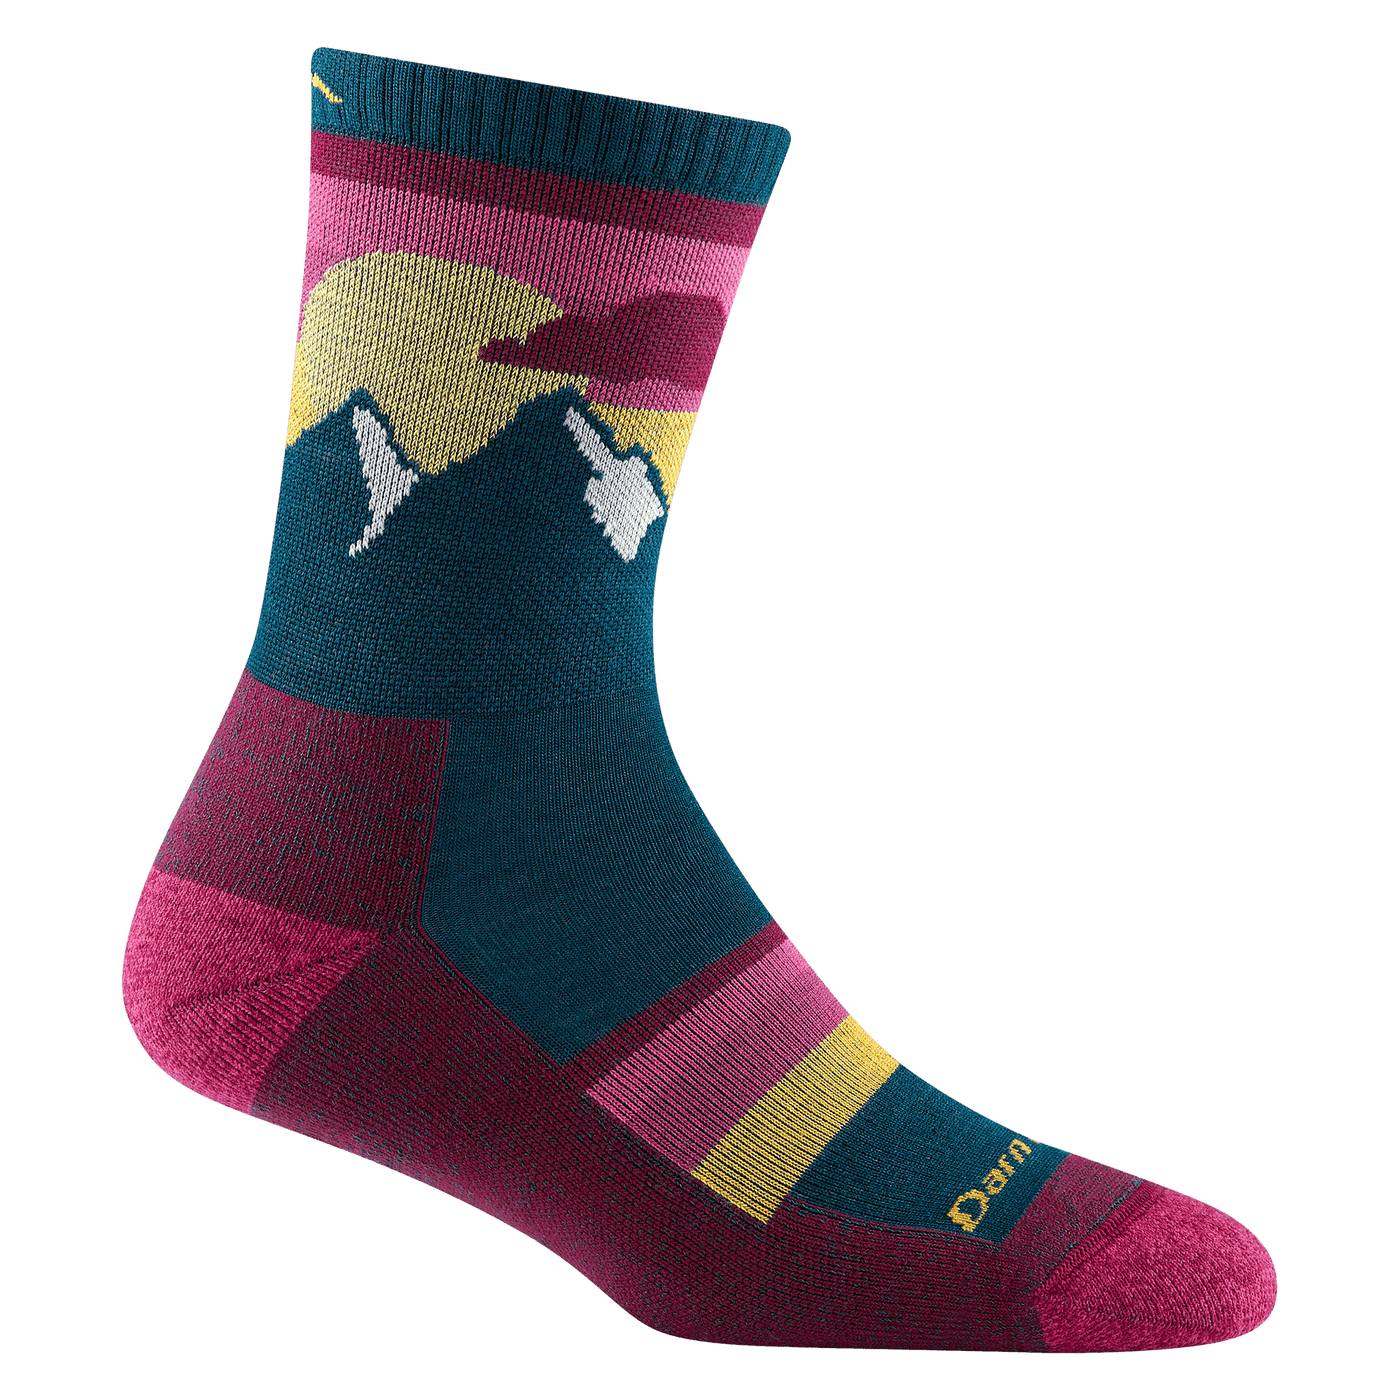 Sunset Ledge, Women's Lightweight Micro Crew with Cushion #5005 - Darn Tough - The Sock Monster